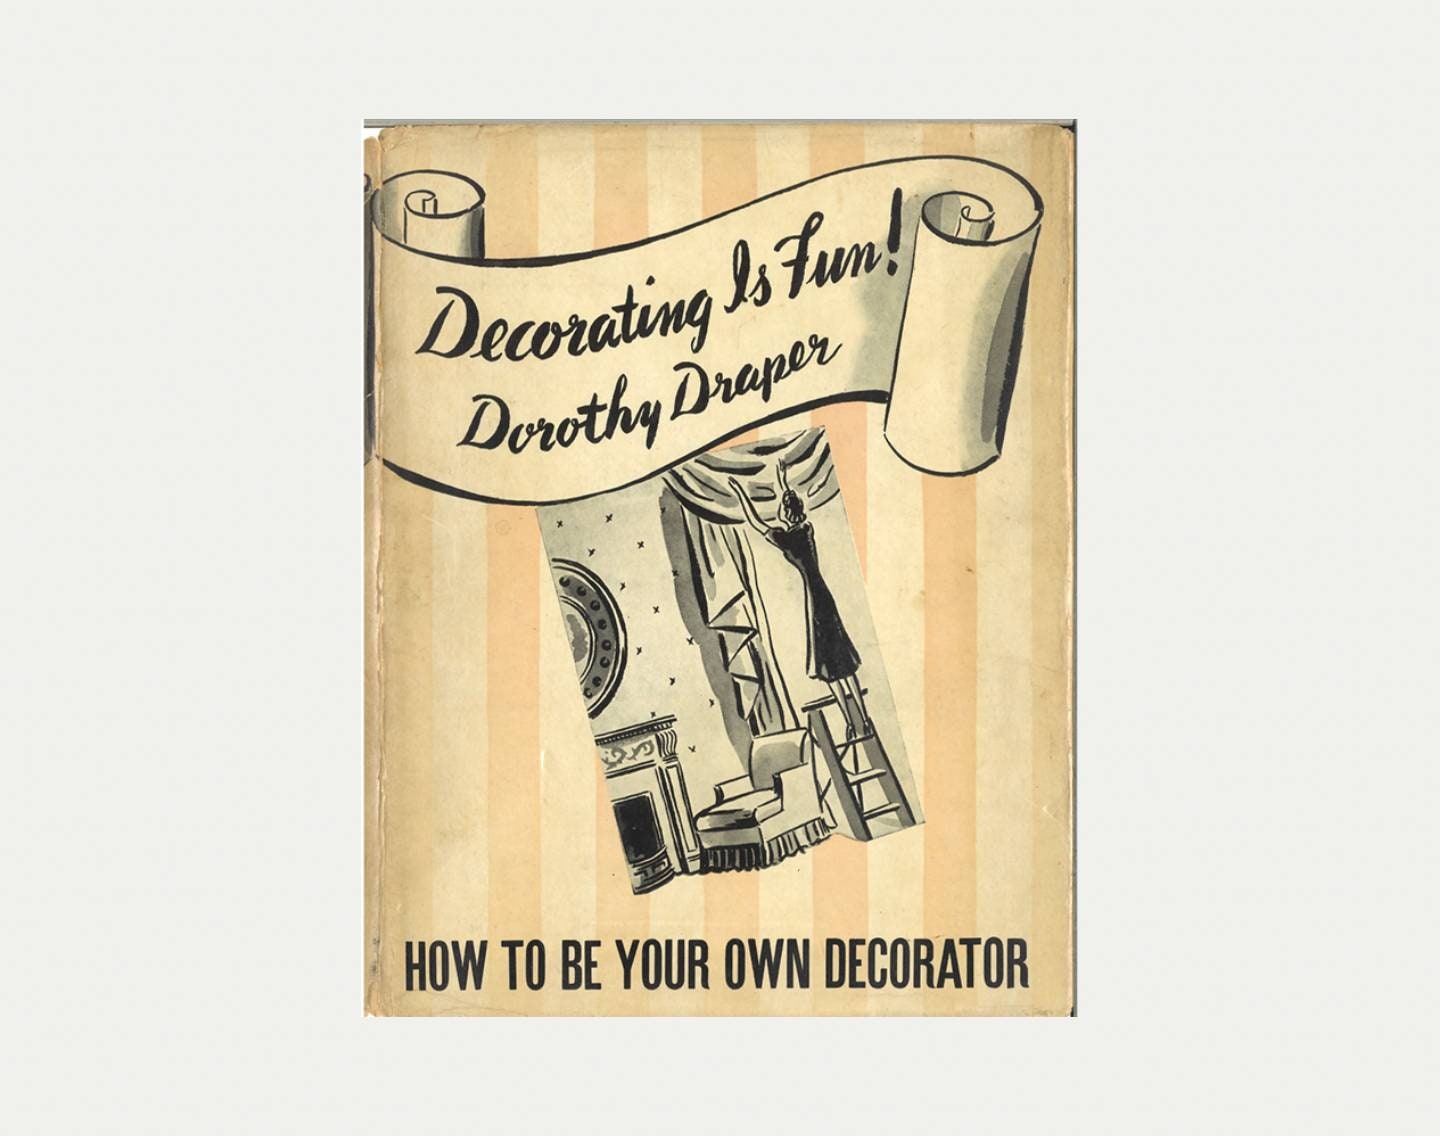 A practical 1939 guide to decorating